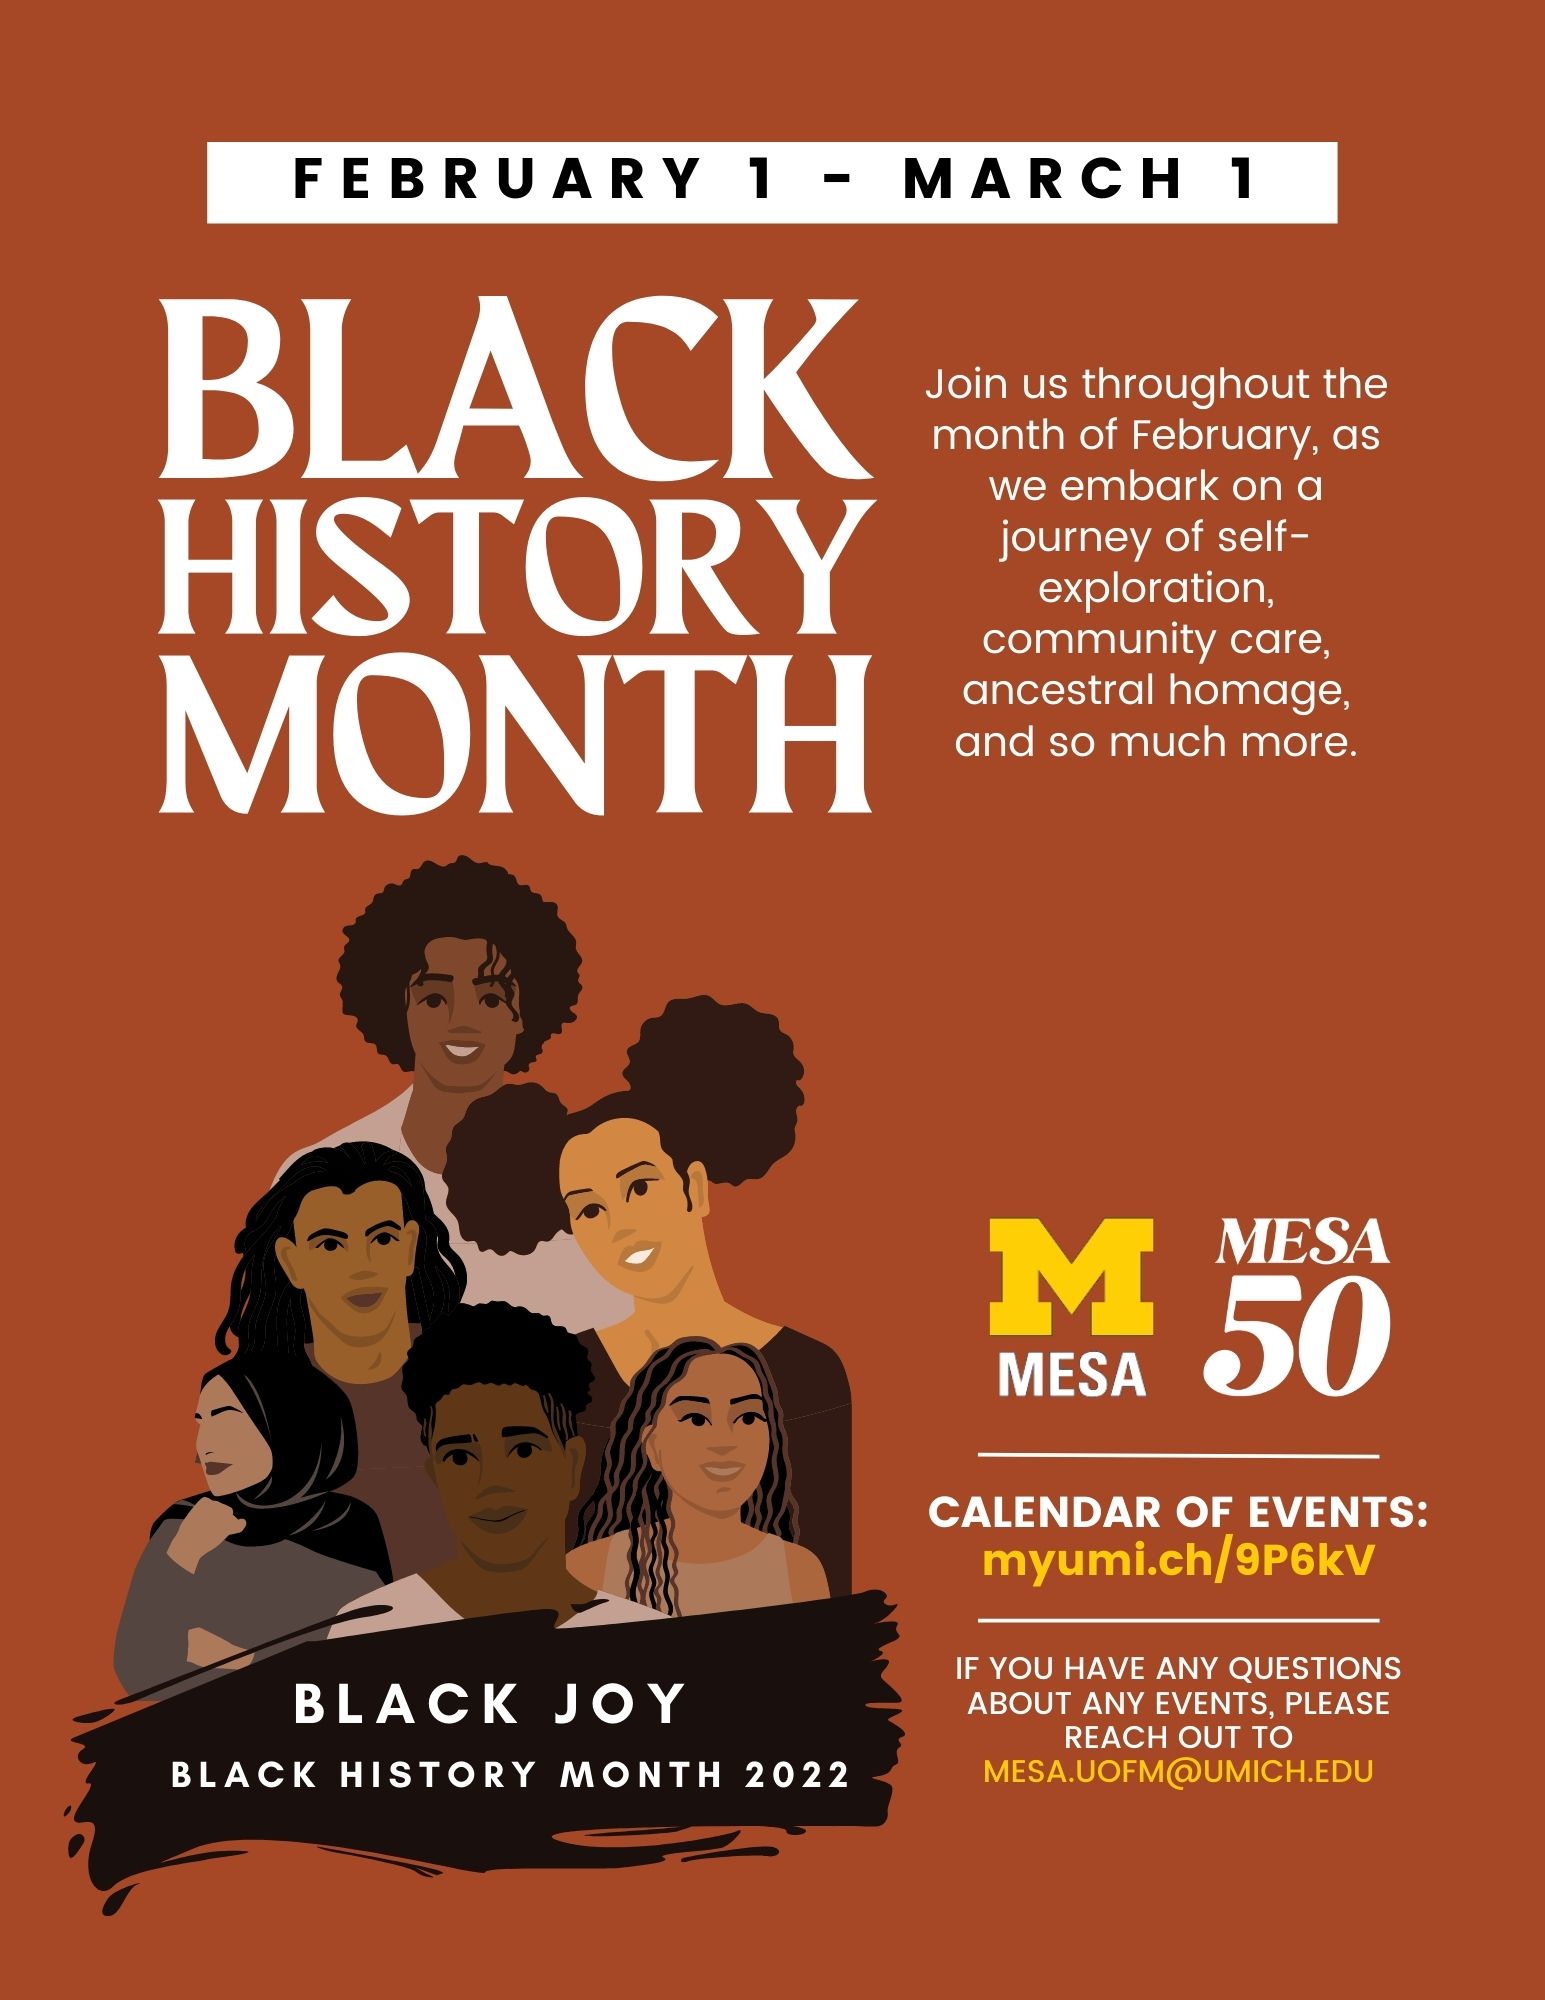 UofL to celebrate Black History Month with events throughout